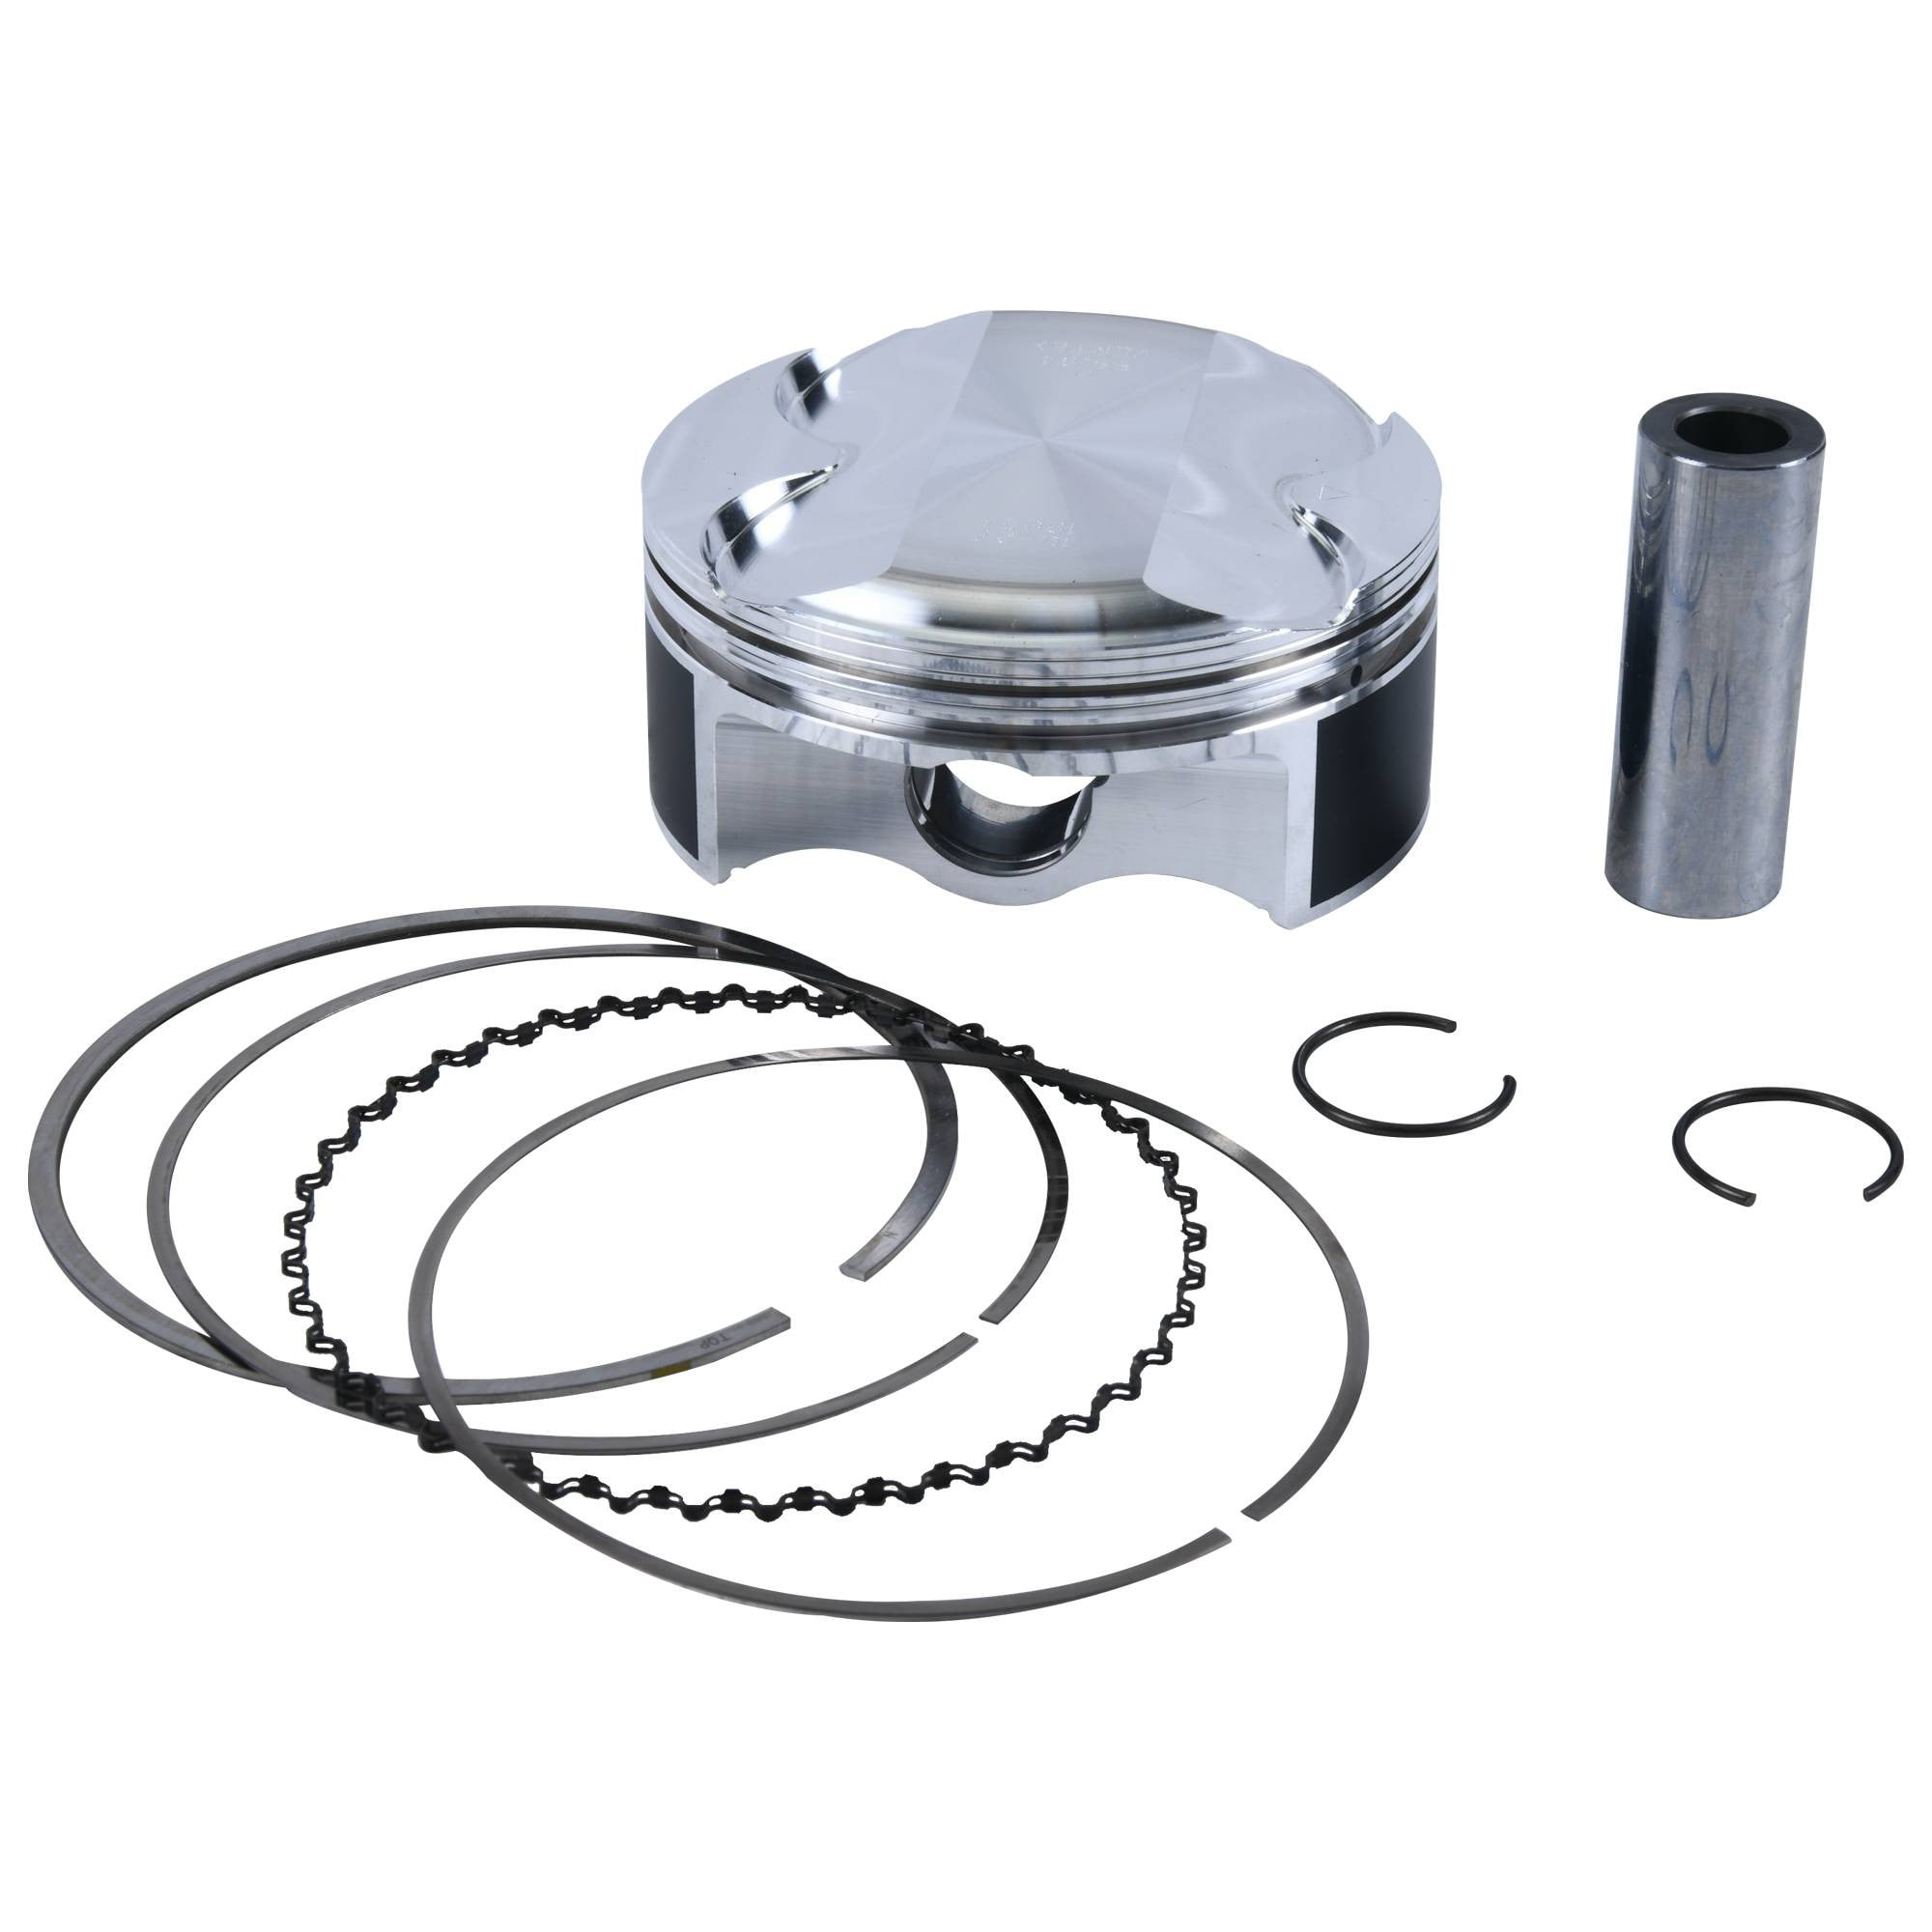 Vertex New Replica Forged Piston Kit Compatible with/Replacement for Honda CRF 250 R 08-09 23443A 